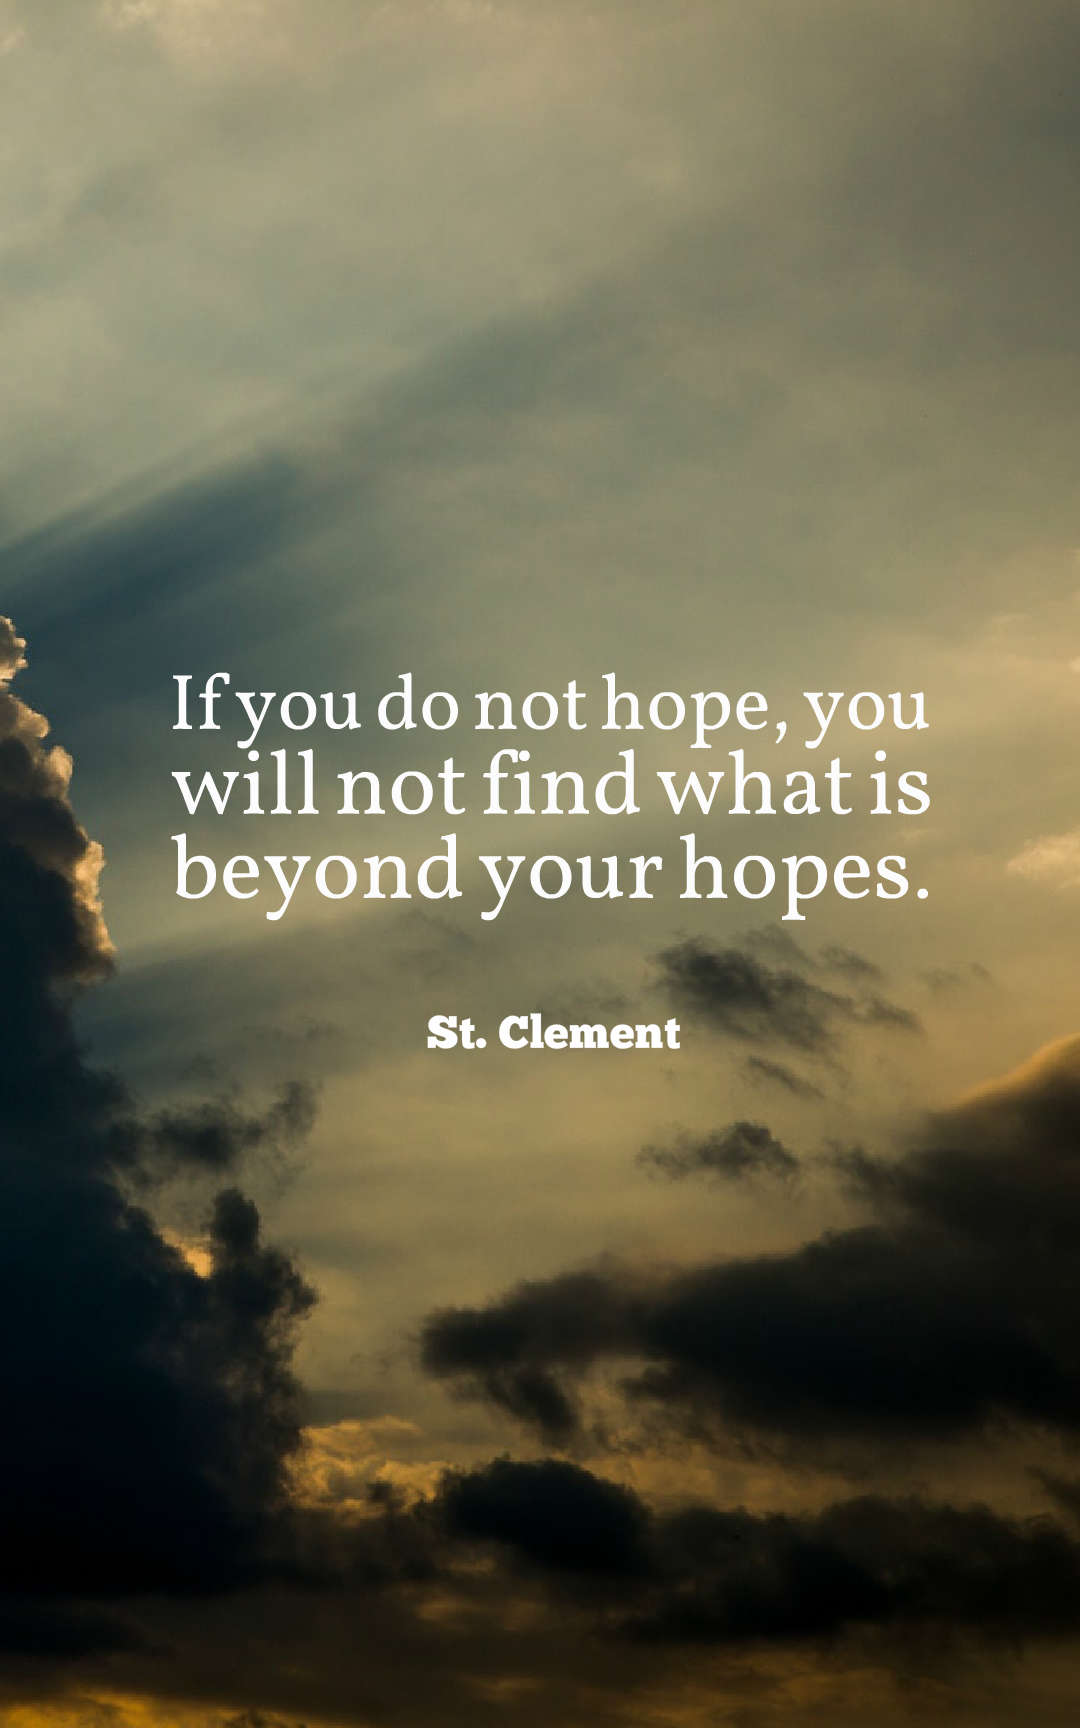 If you do not hope, you will not find what is beyond your hopes.